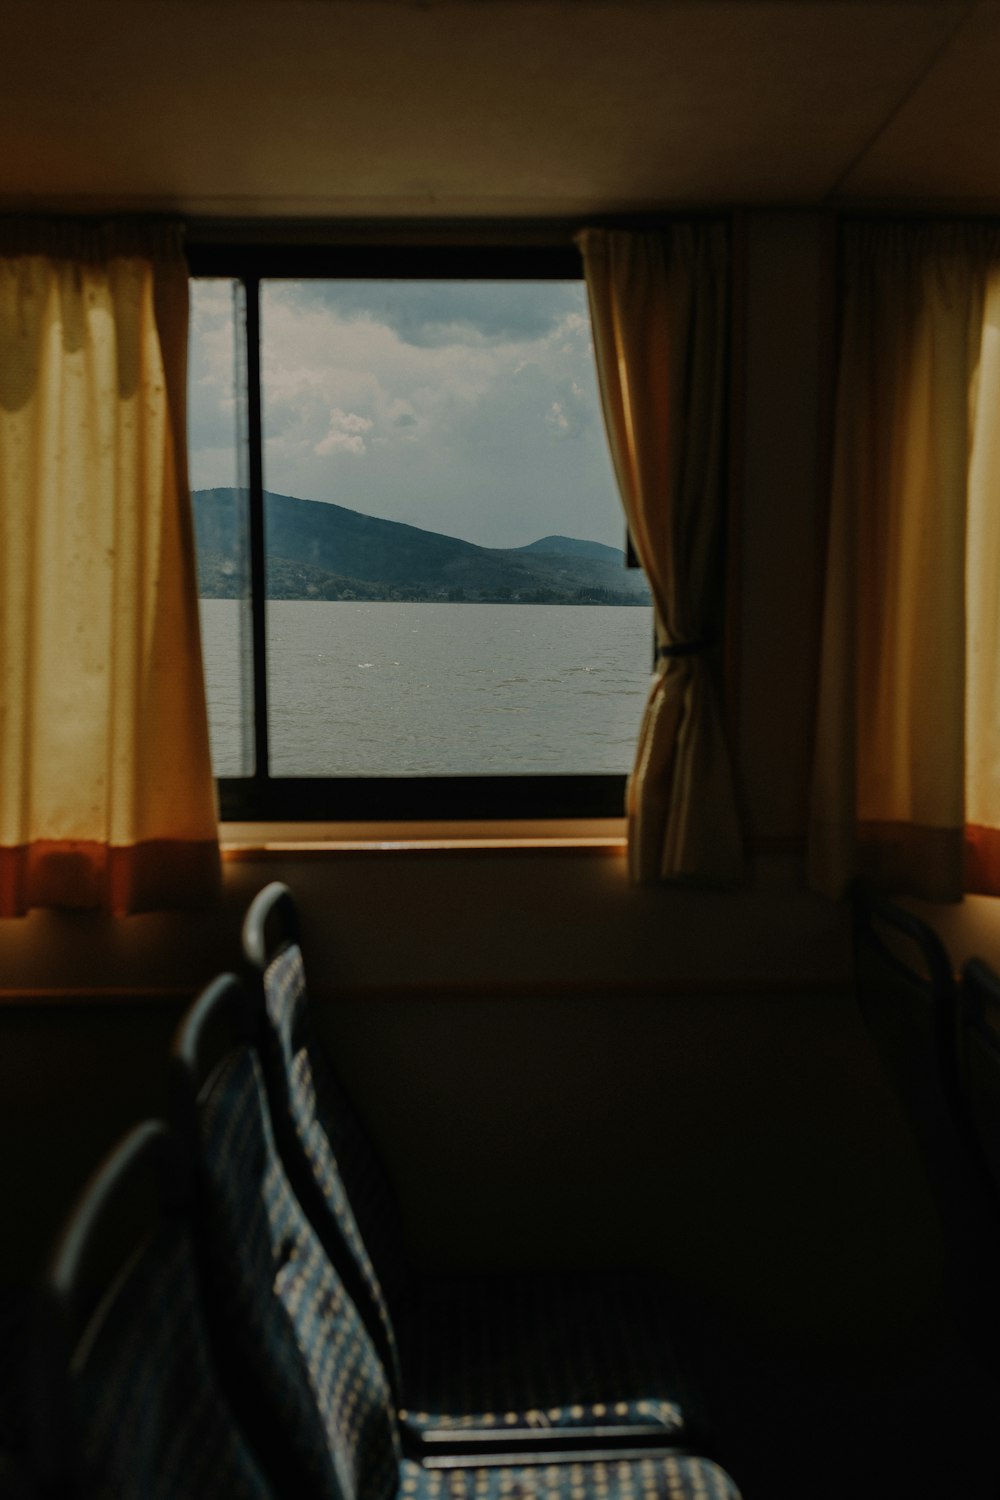 a view of the ocean from a train window